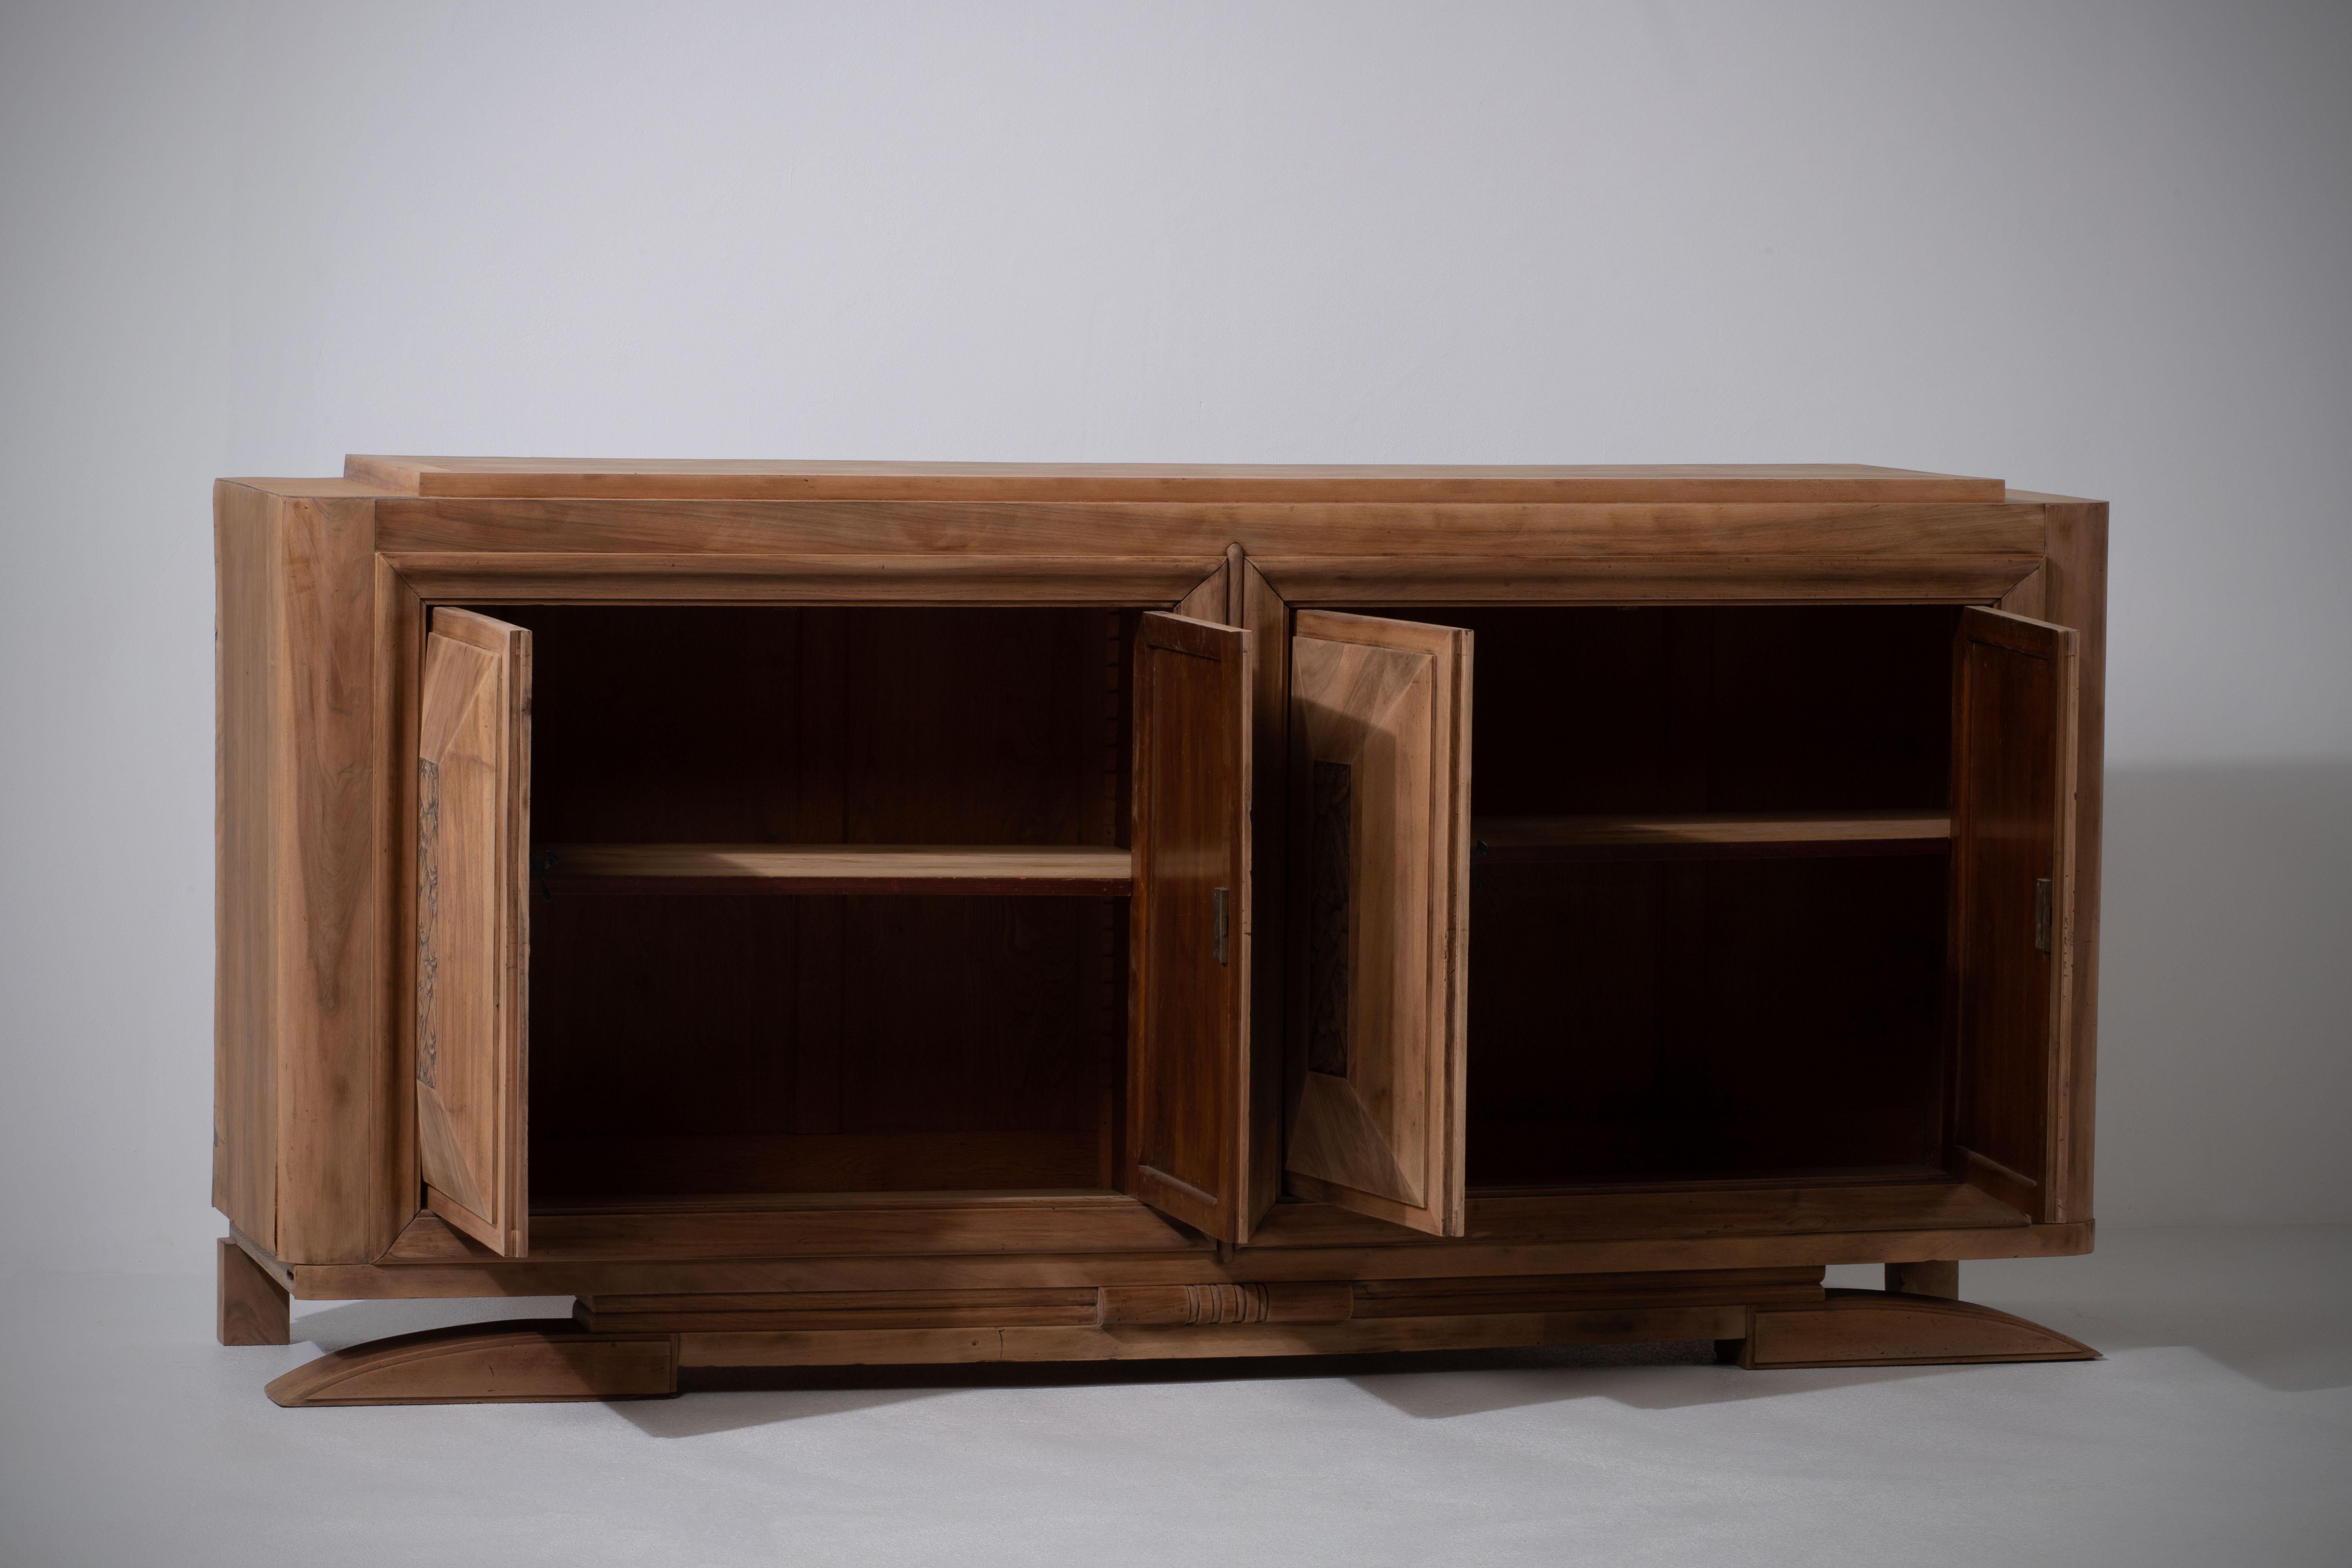 French Provincial Art Deco Oak Sideboard with Handcarved Doors, France, 1940s For Sale